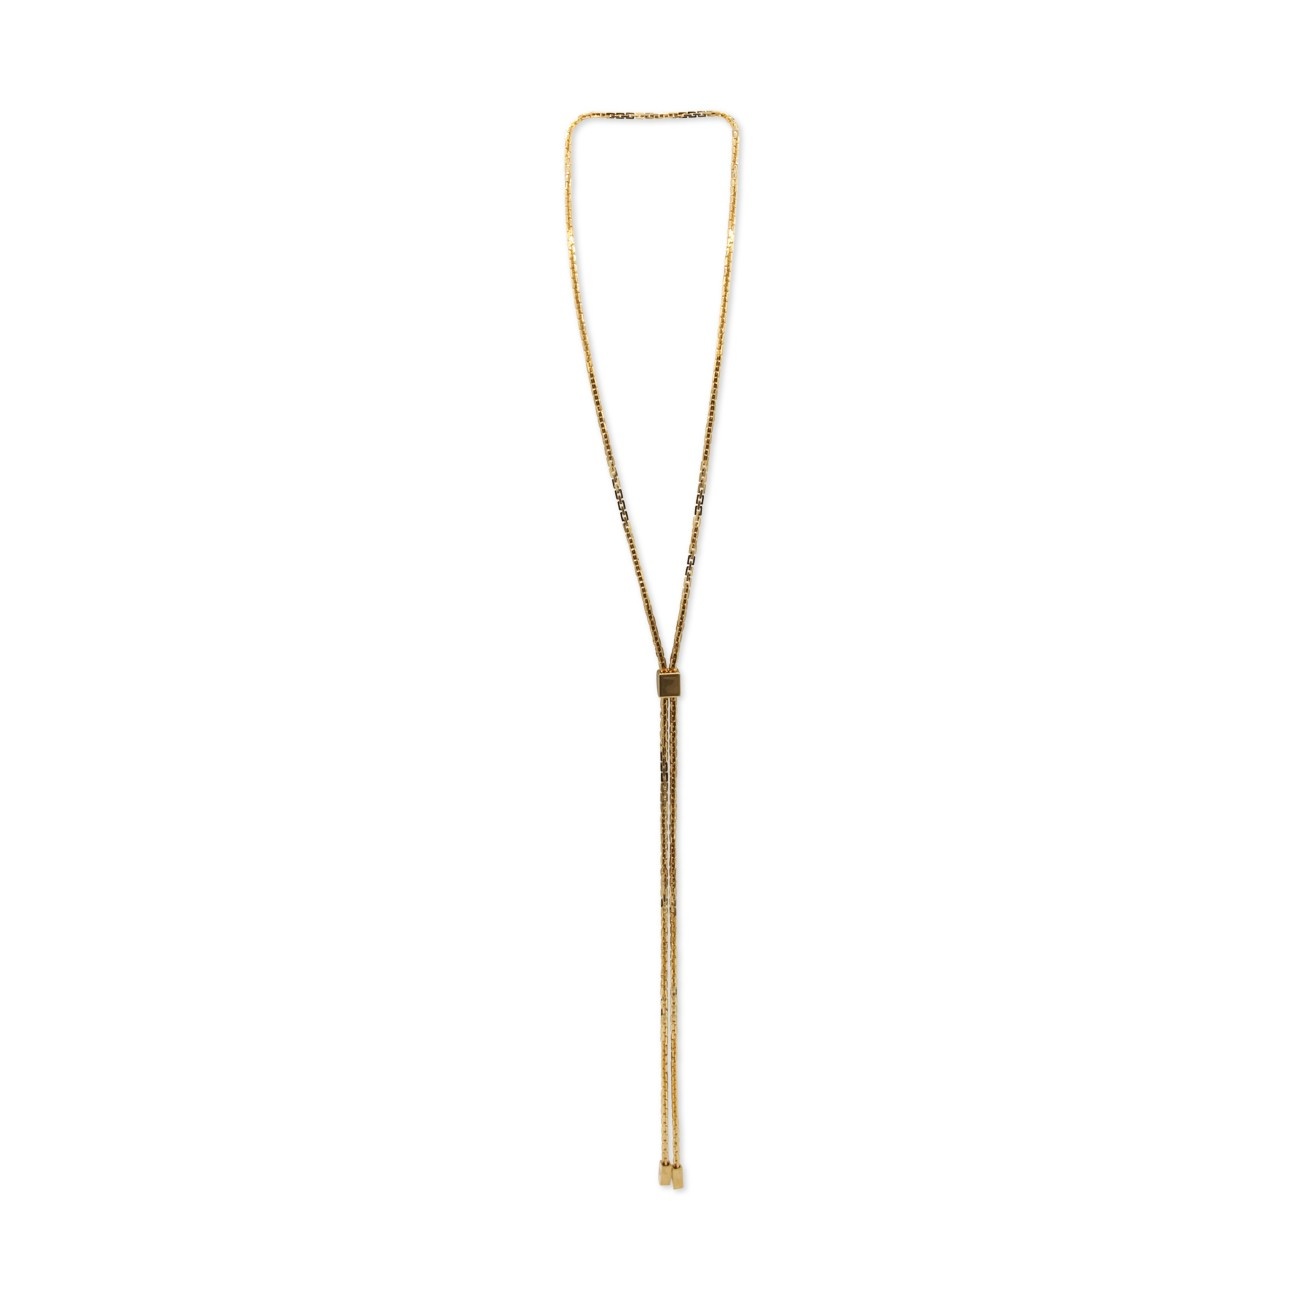 gold-tone brass necklace - 1